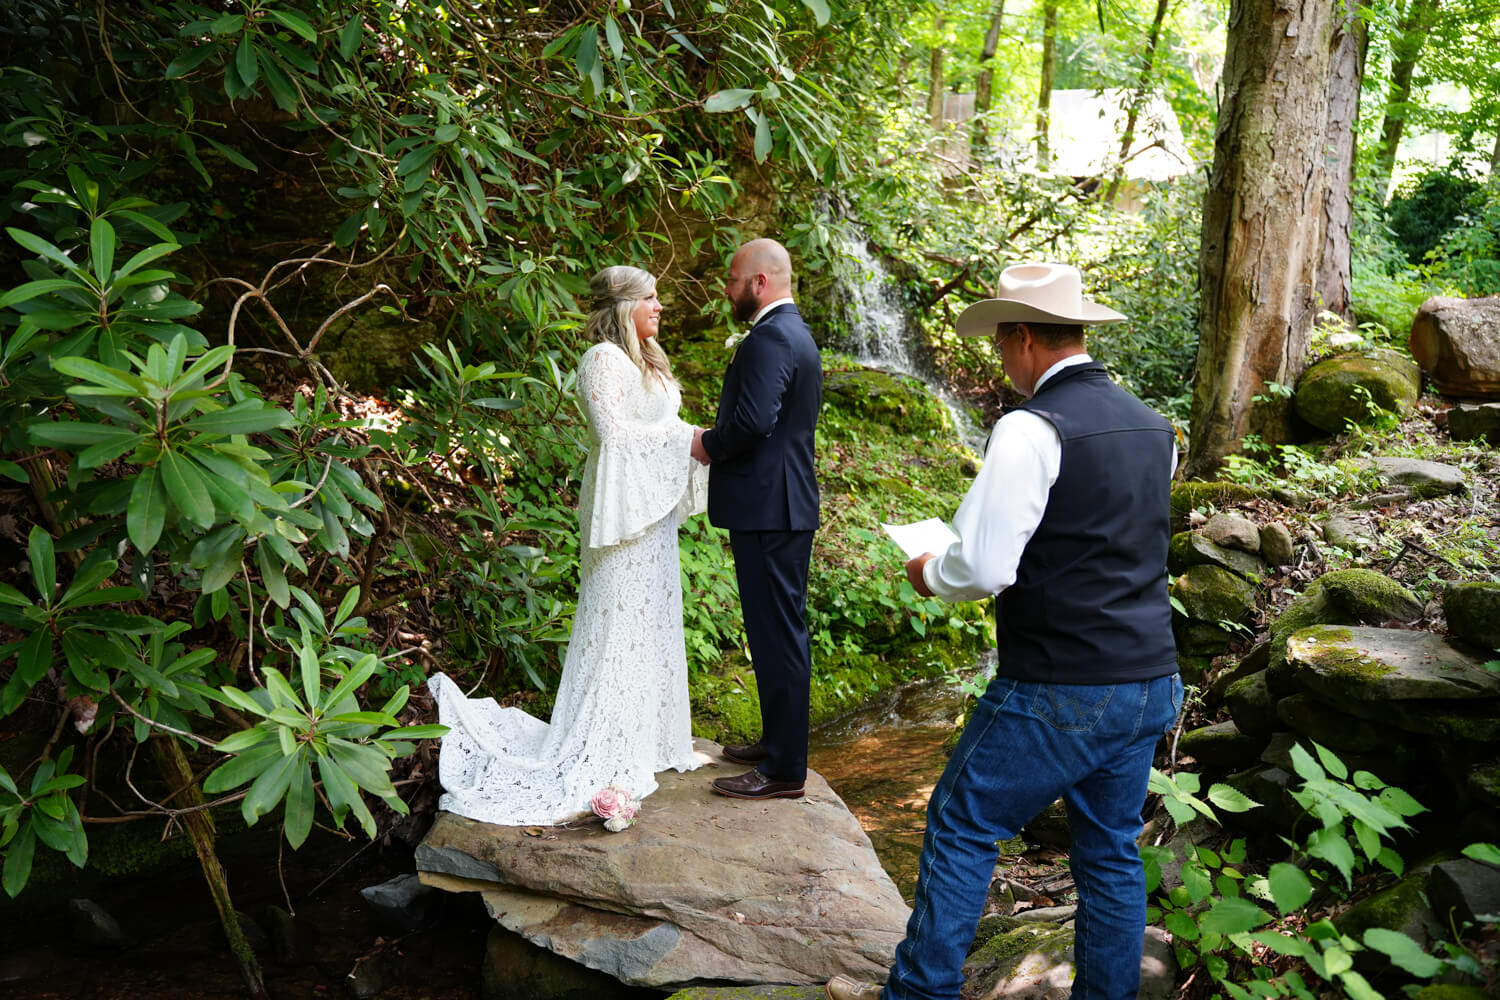 Pastor in cowboy hat marrying a couple standing on a rock by a waterfall in the mountains of Pigeon Forge